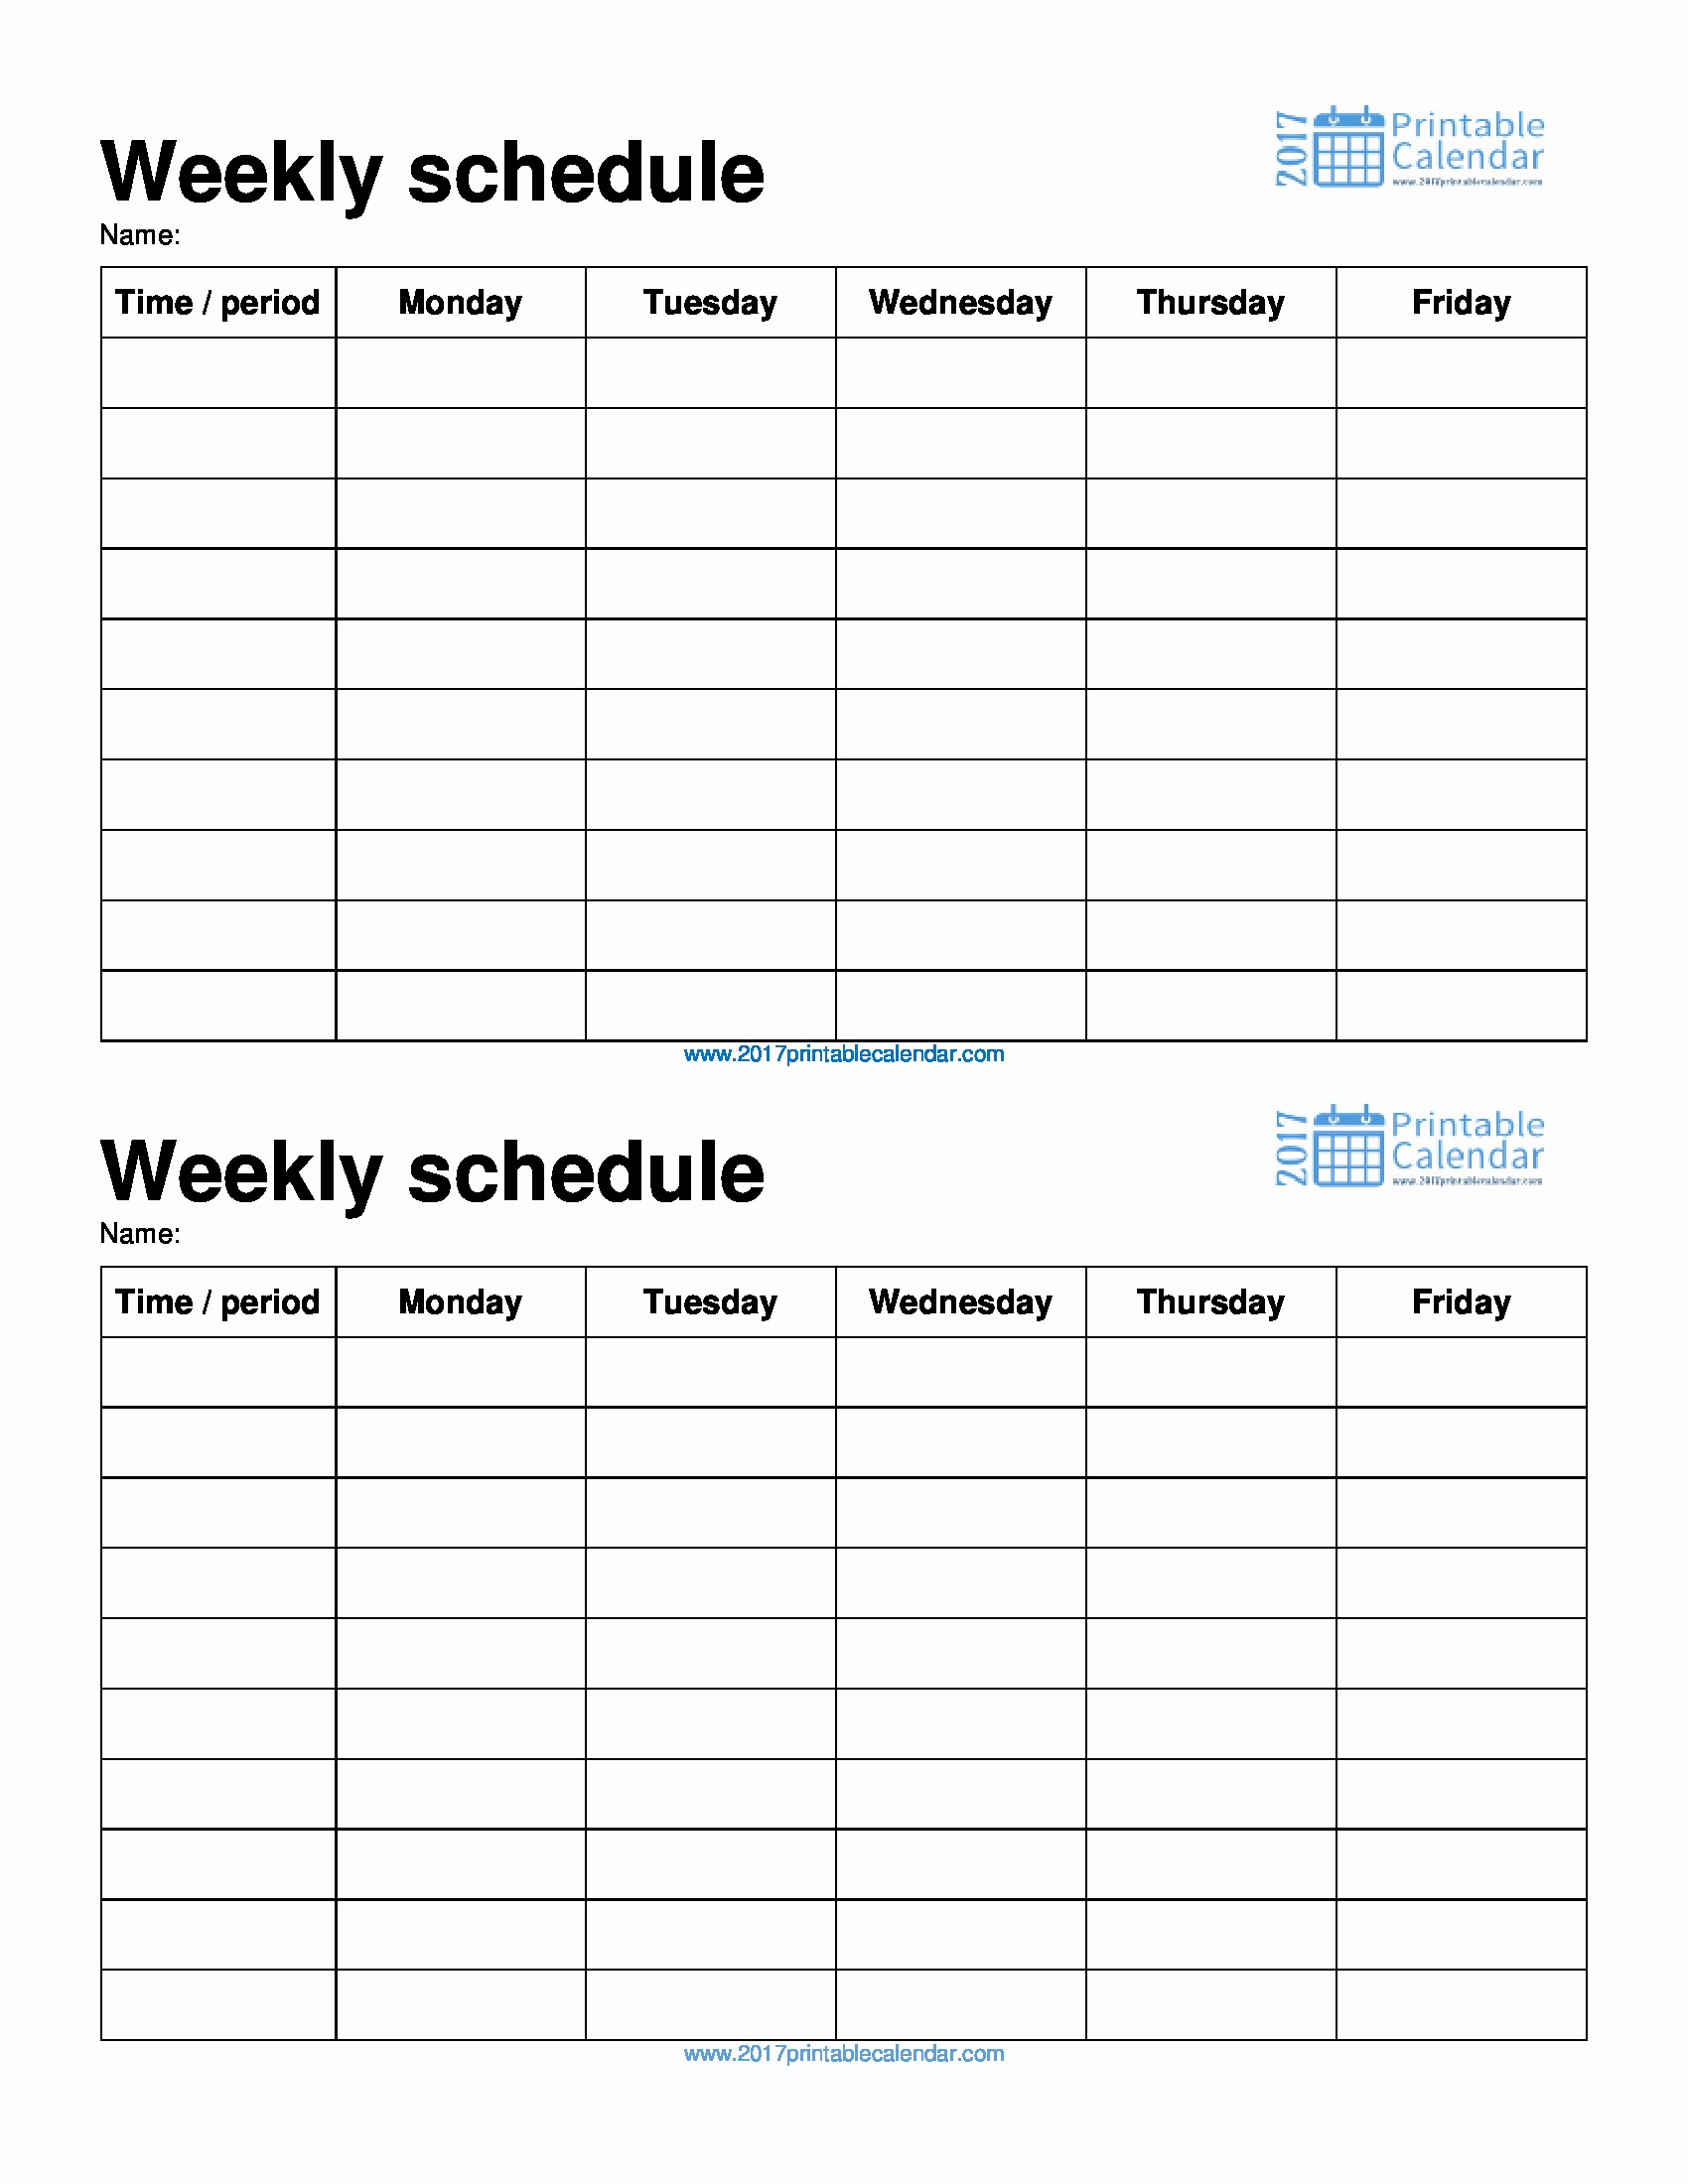 Weekly Schedule Template with Time Fresh Weekly Schedule Template – 2017 Printable Calendar